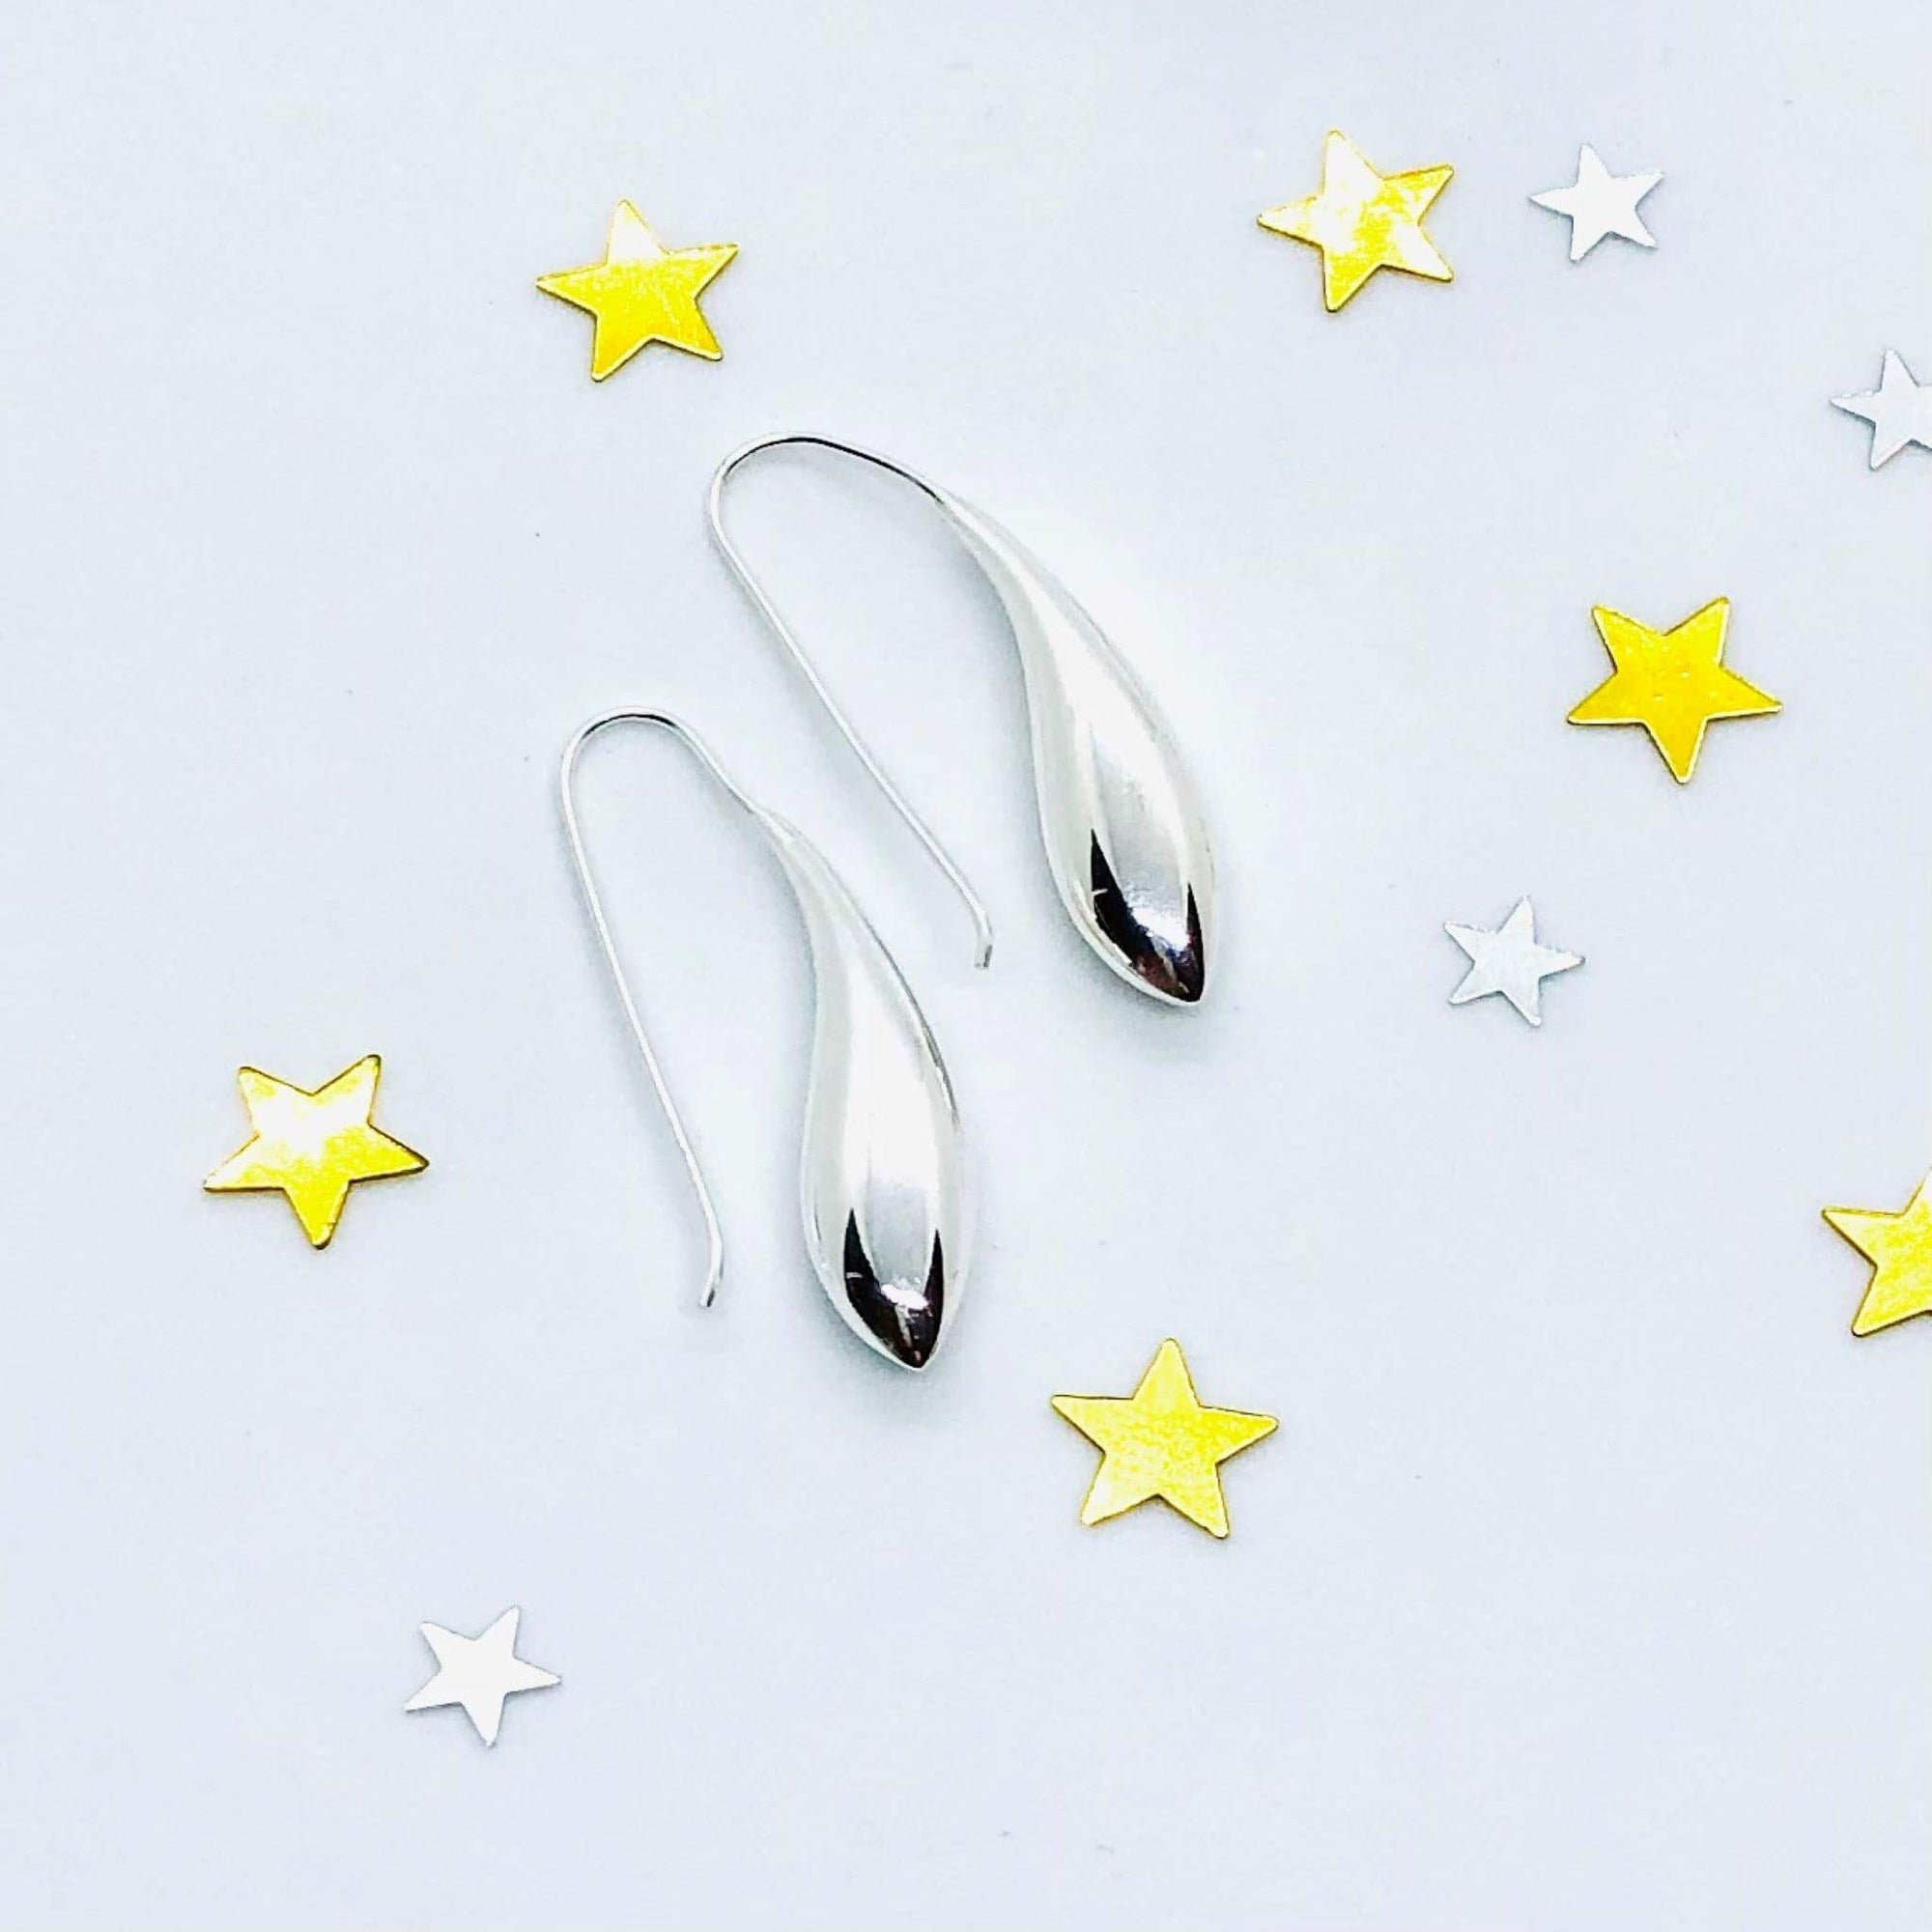 Sterling silver teardop earrings with shepherd hook fixture. Smooth fluid lines accentuate the teardrop shape. High polish finish. Comes in its own taupe coloured box with black gloss base and finished with black grosgrain bow.